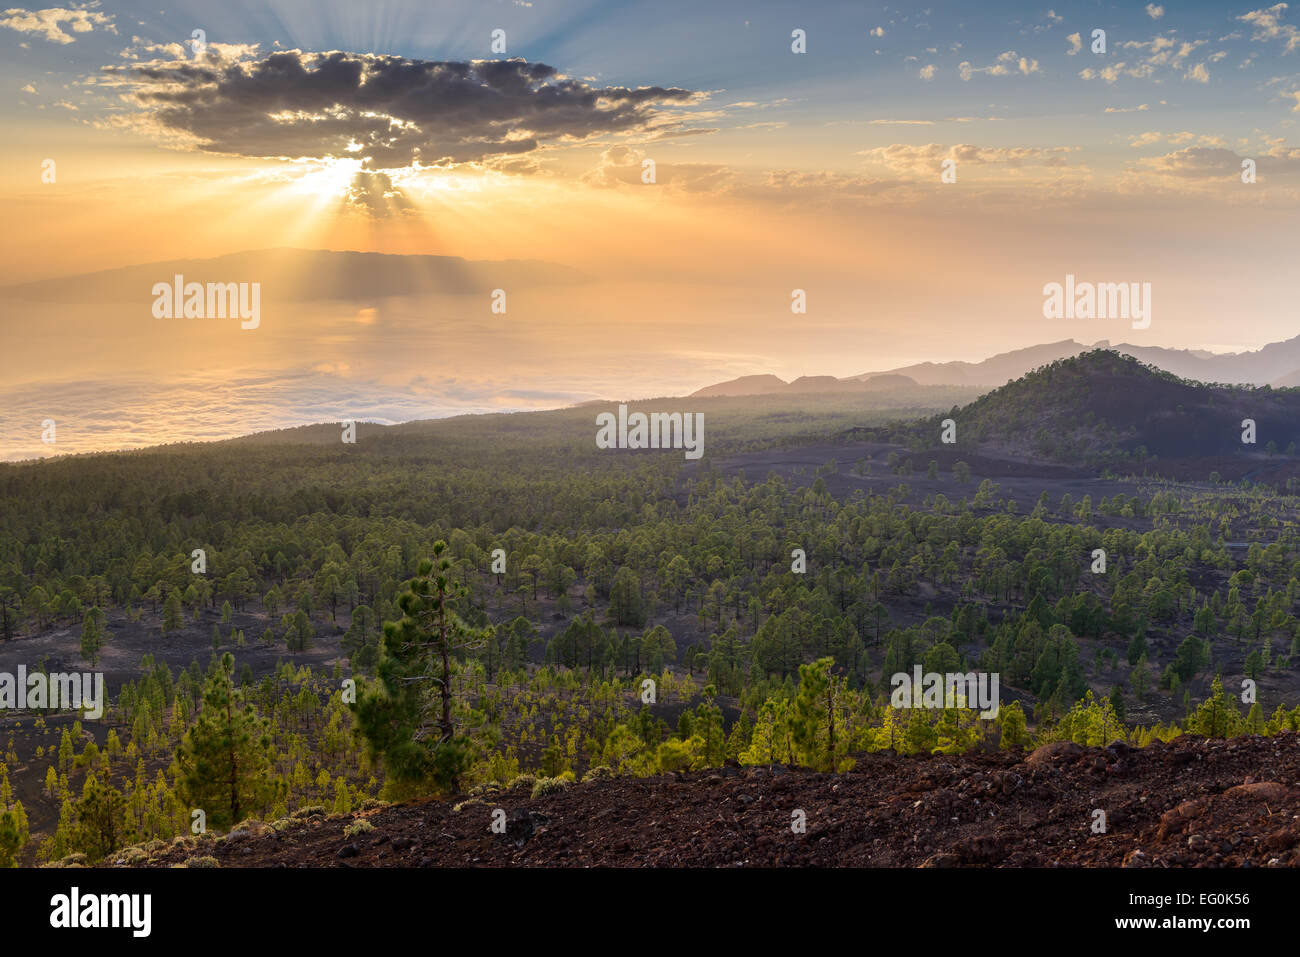 Volcanic landscape at sunset, Tenerife, Canary Islands, Spain Stock Photo